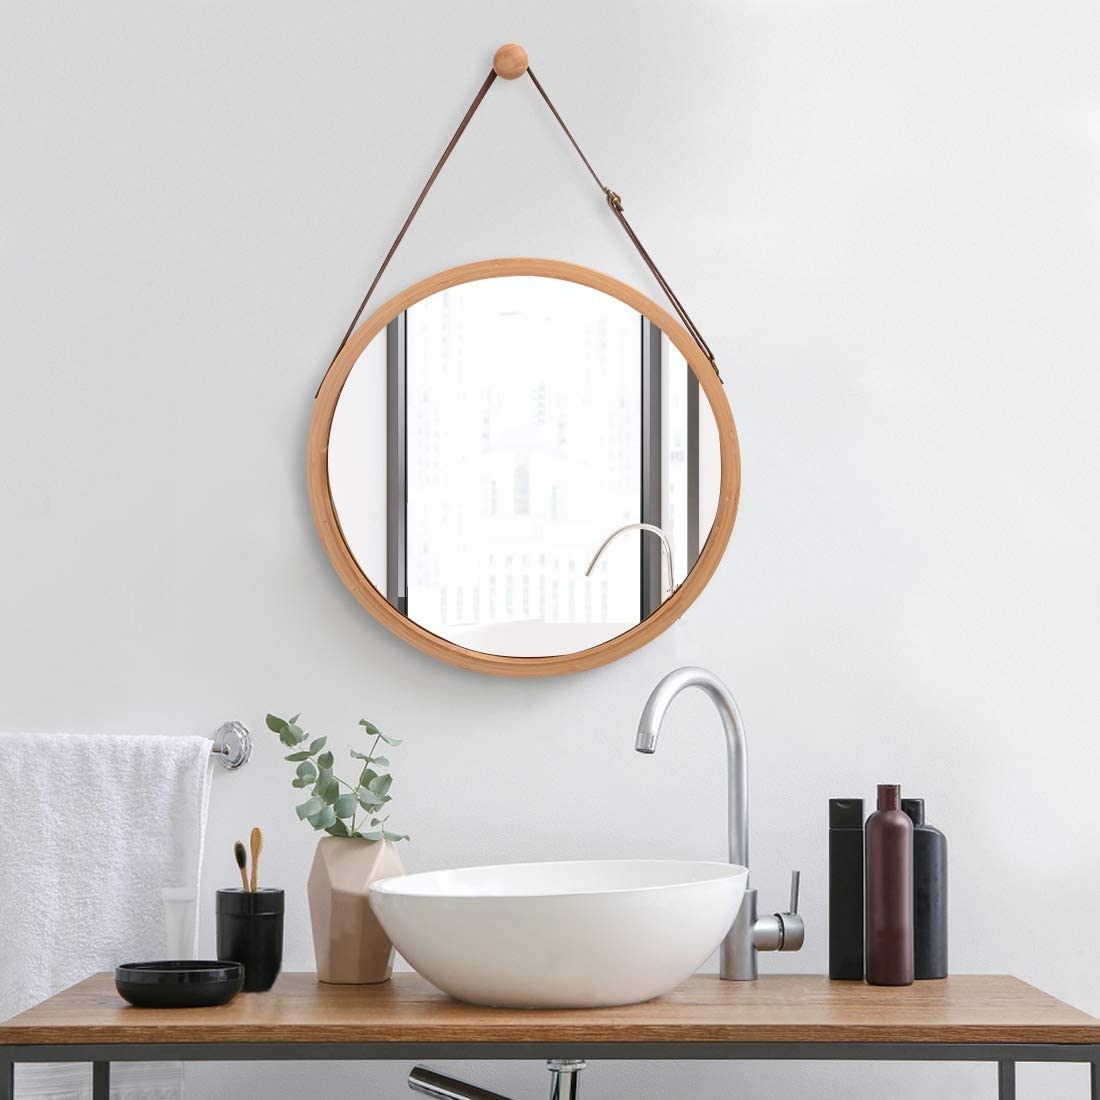 Hanging Round Wall Mirror 45 cm - Solid Bamboo Frame and Adjustable Leather Strap for Bathroom and Bedroom - Delldesign Living - Health & Beauty > Makeup Mirrors - free-shipping